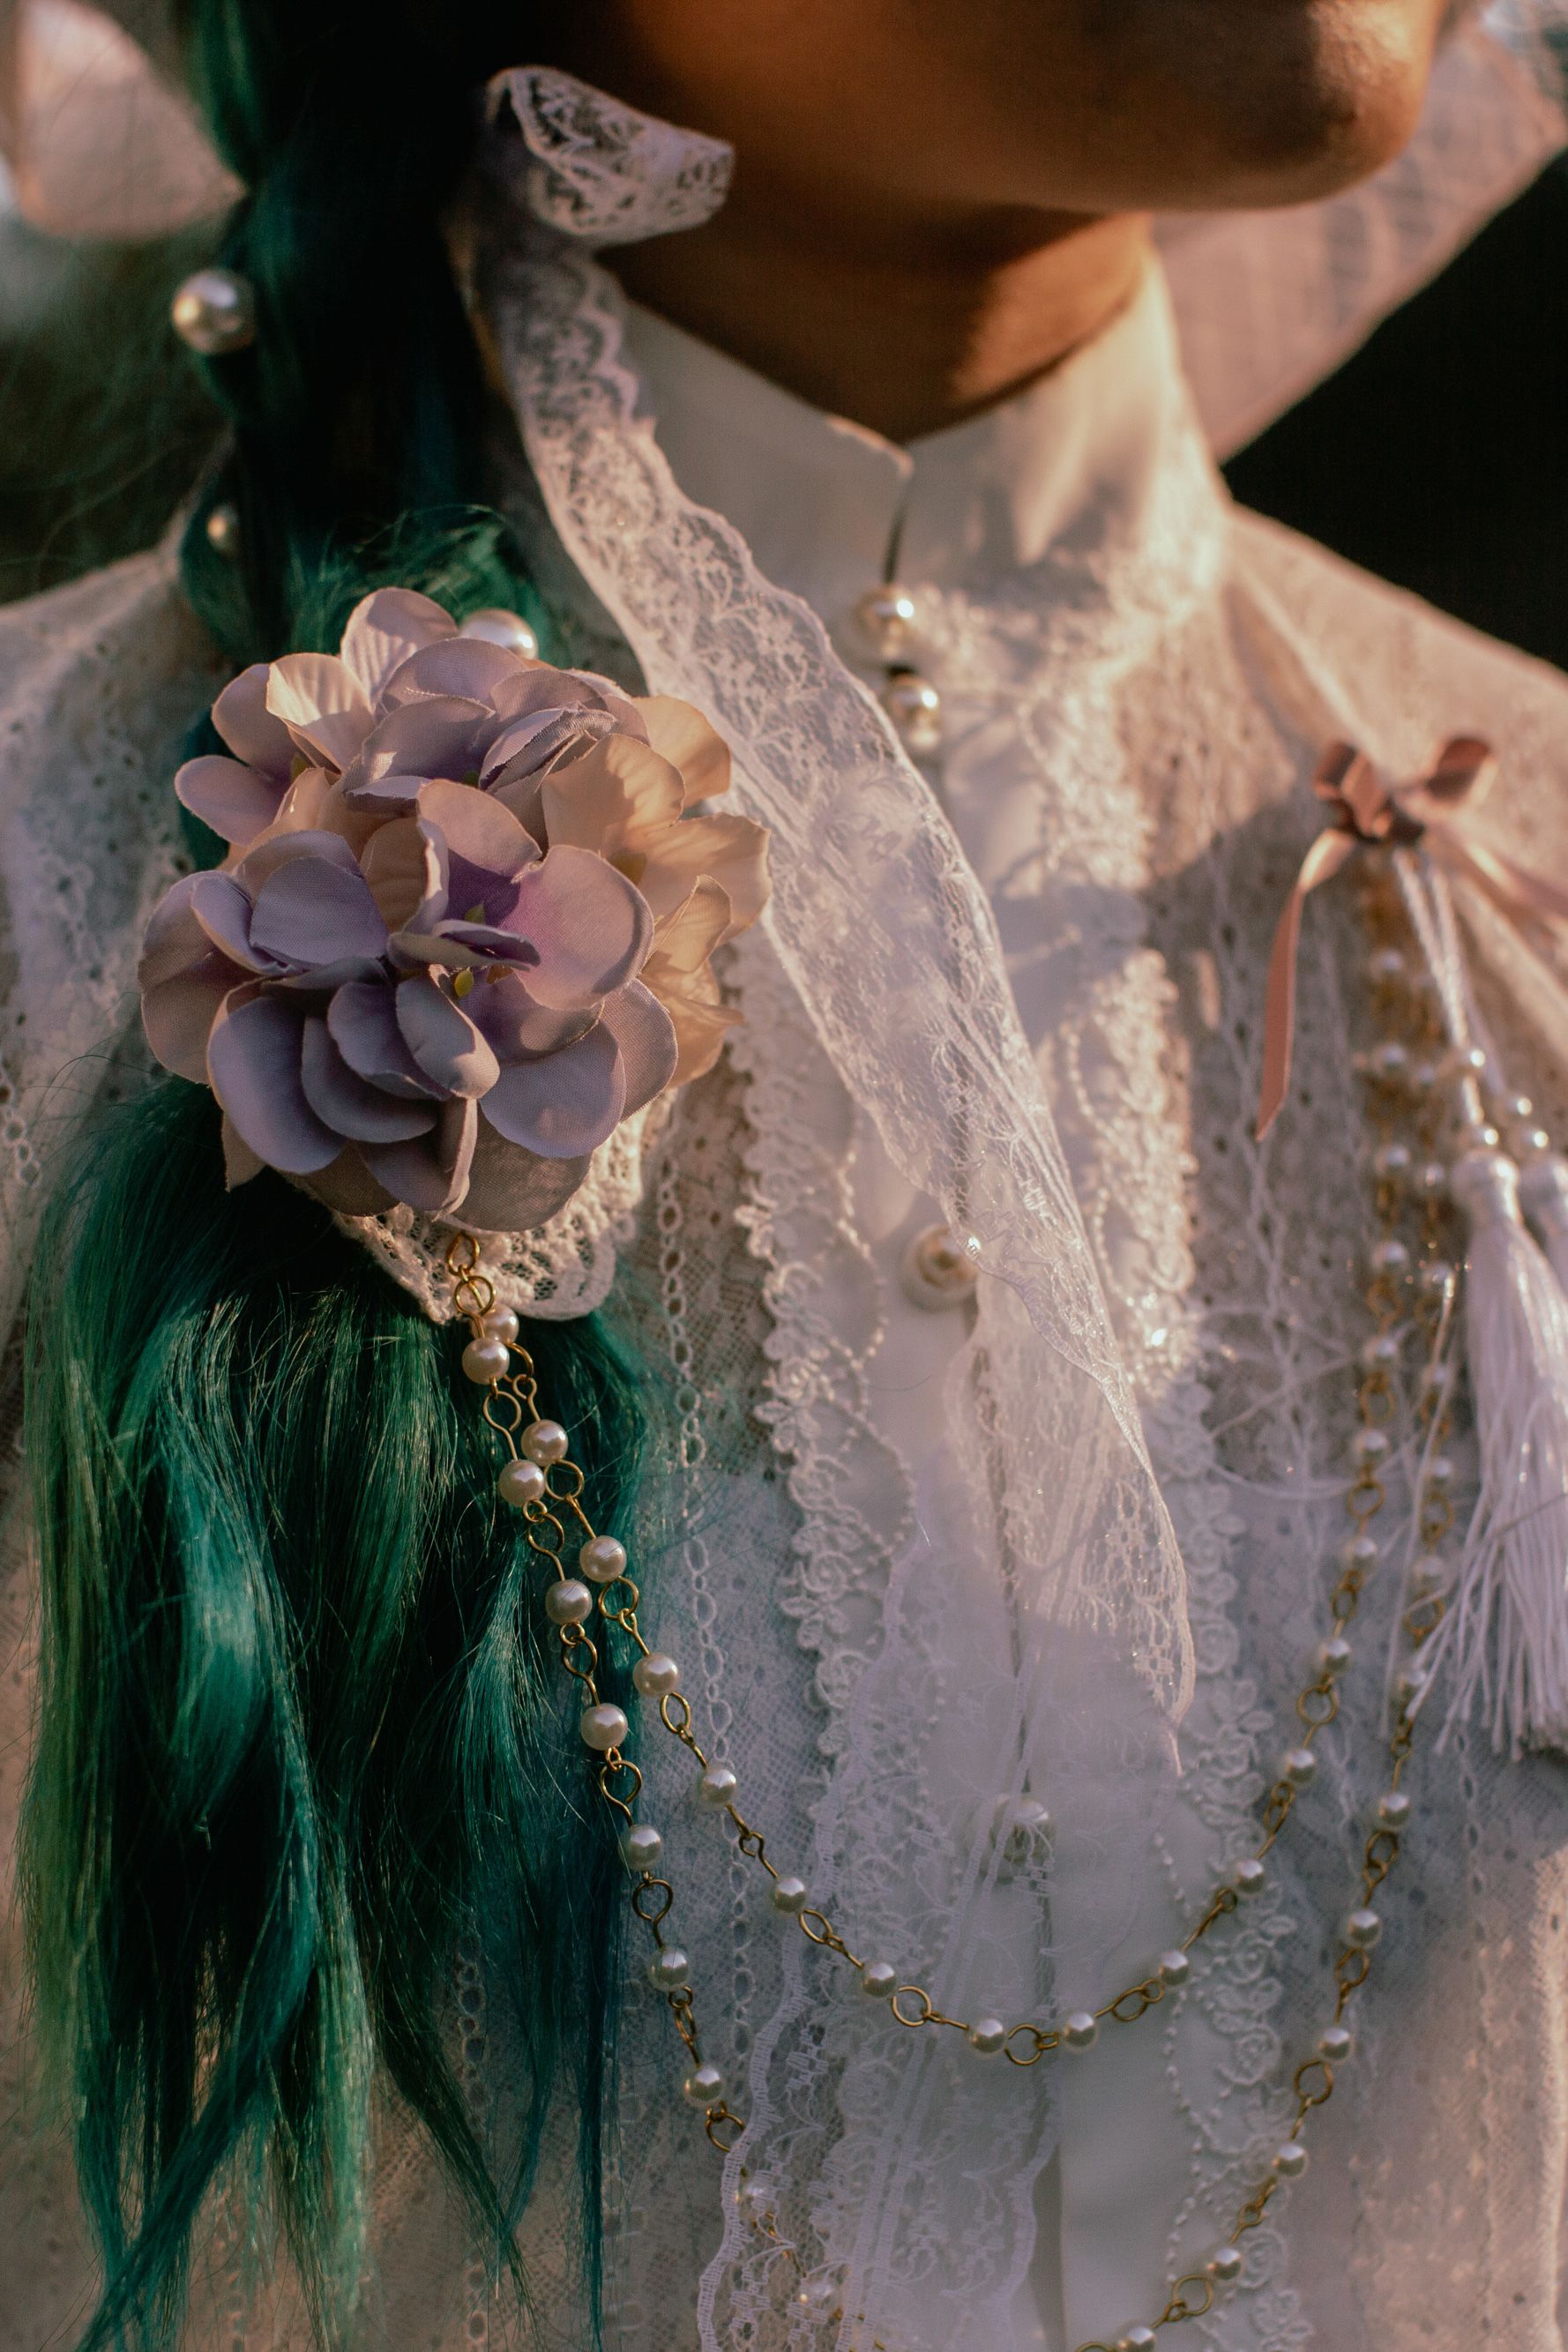 Kandace accessorized her outfit with pearls, lace, and flowers, while attending a tea party in the Morcom Rose Garden in Oakland, California, on Feb. 25, 2021. Lolitas often wear wigs in combination with other headwear such as hair bows or bonnets.